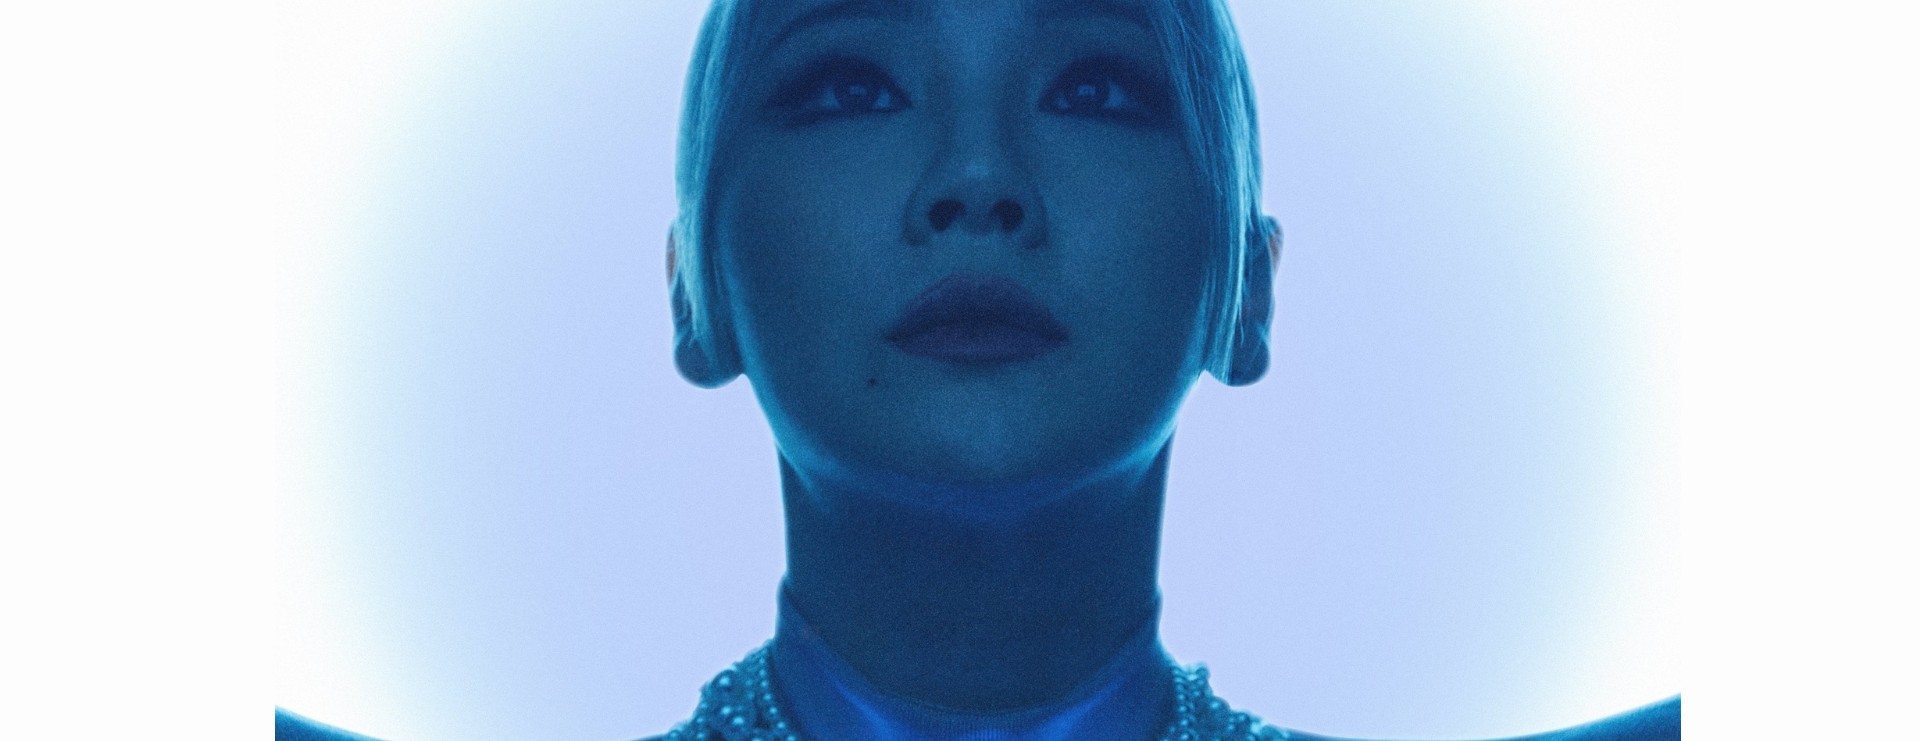 CL reveals details for upcoming single 'SPICY,' new album, 'ALPHA'